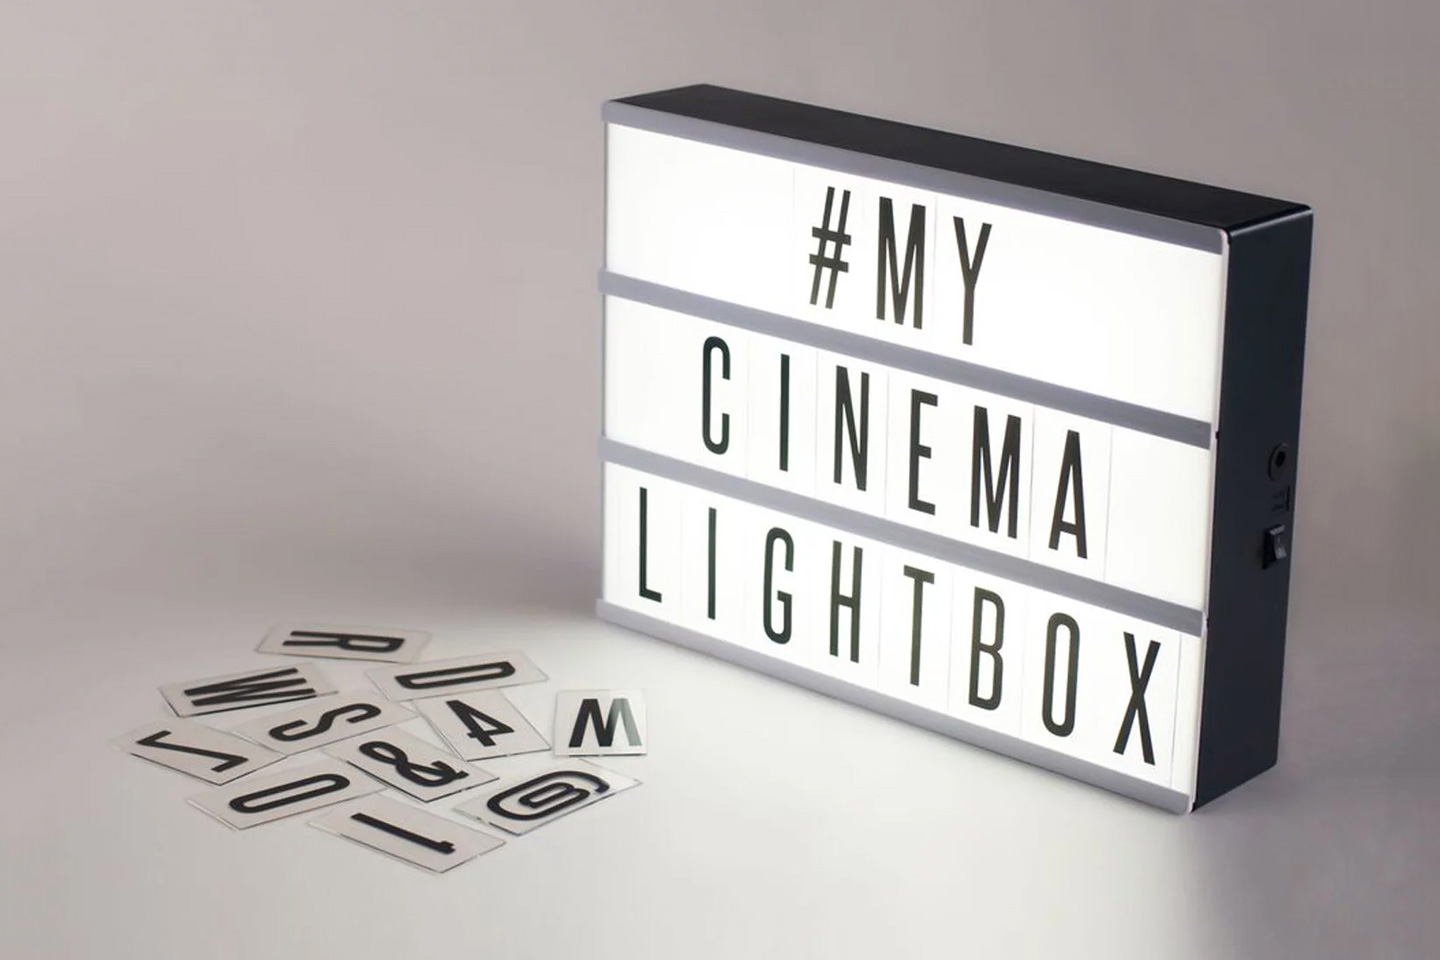 #This retro cinema lightbox is perfect for writing fun or motivational messages!